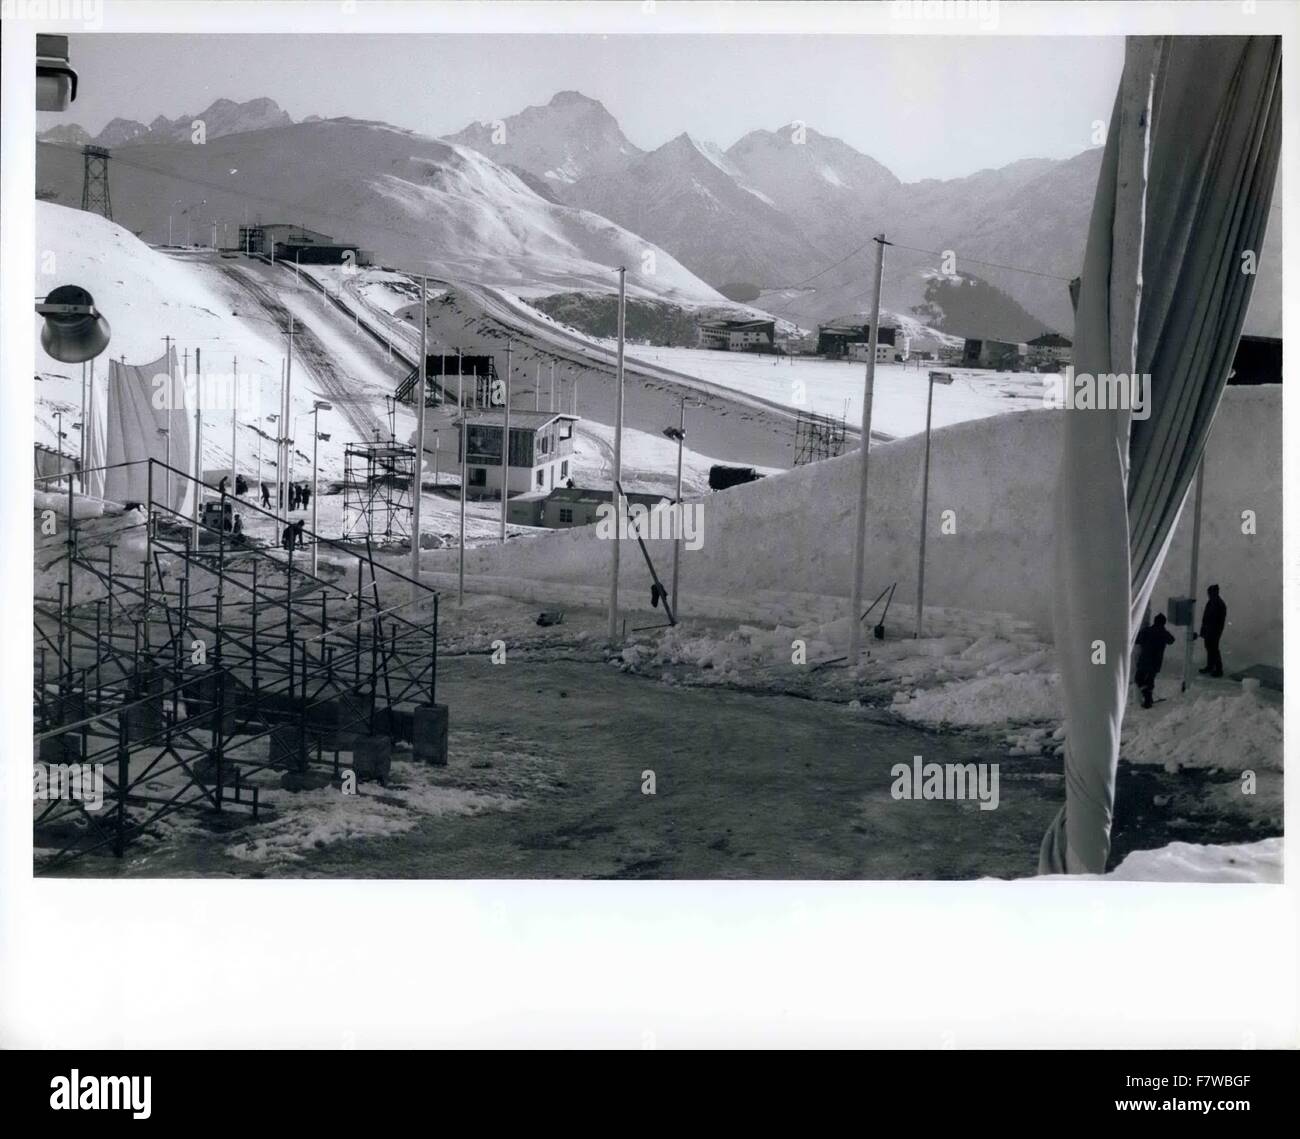 1968 - Winter Olympics Site, Grenoble 1968 Area Of Olympic Bobsled Run ...